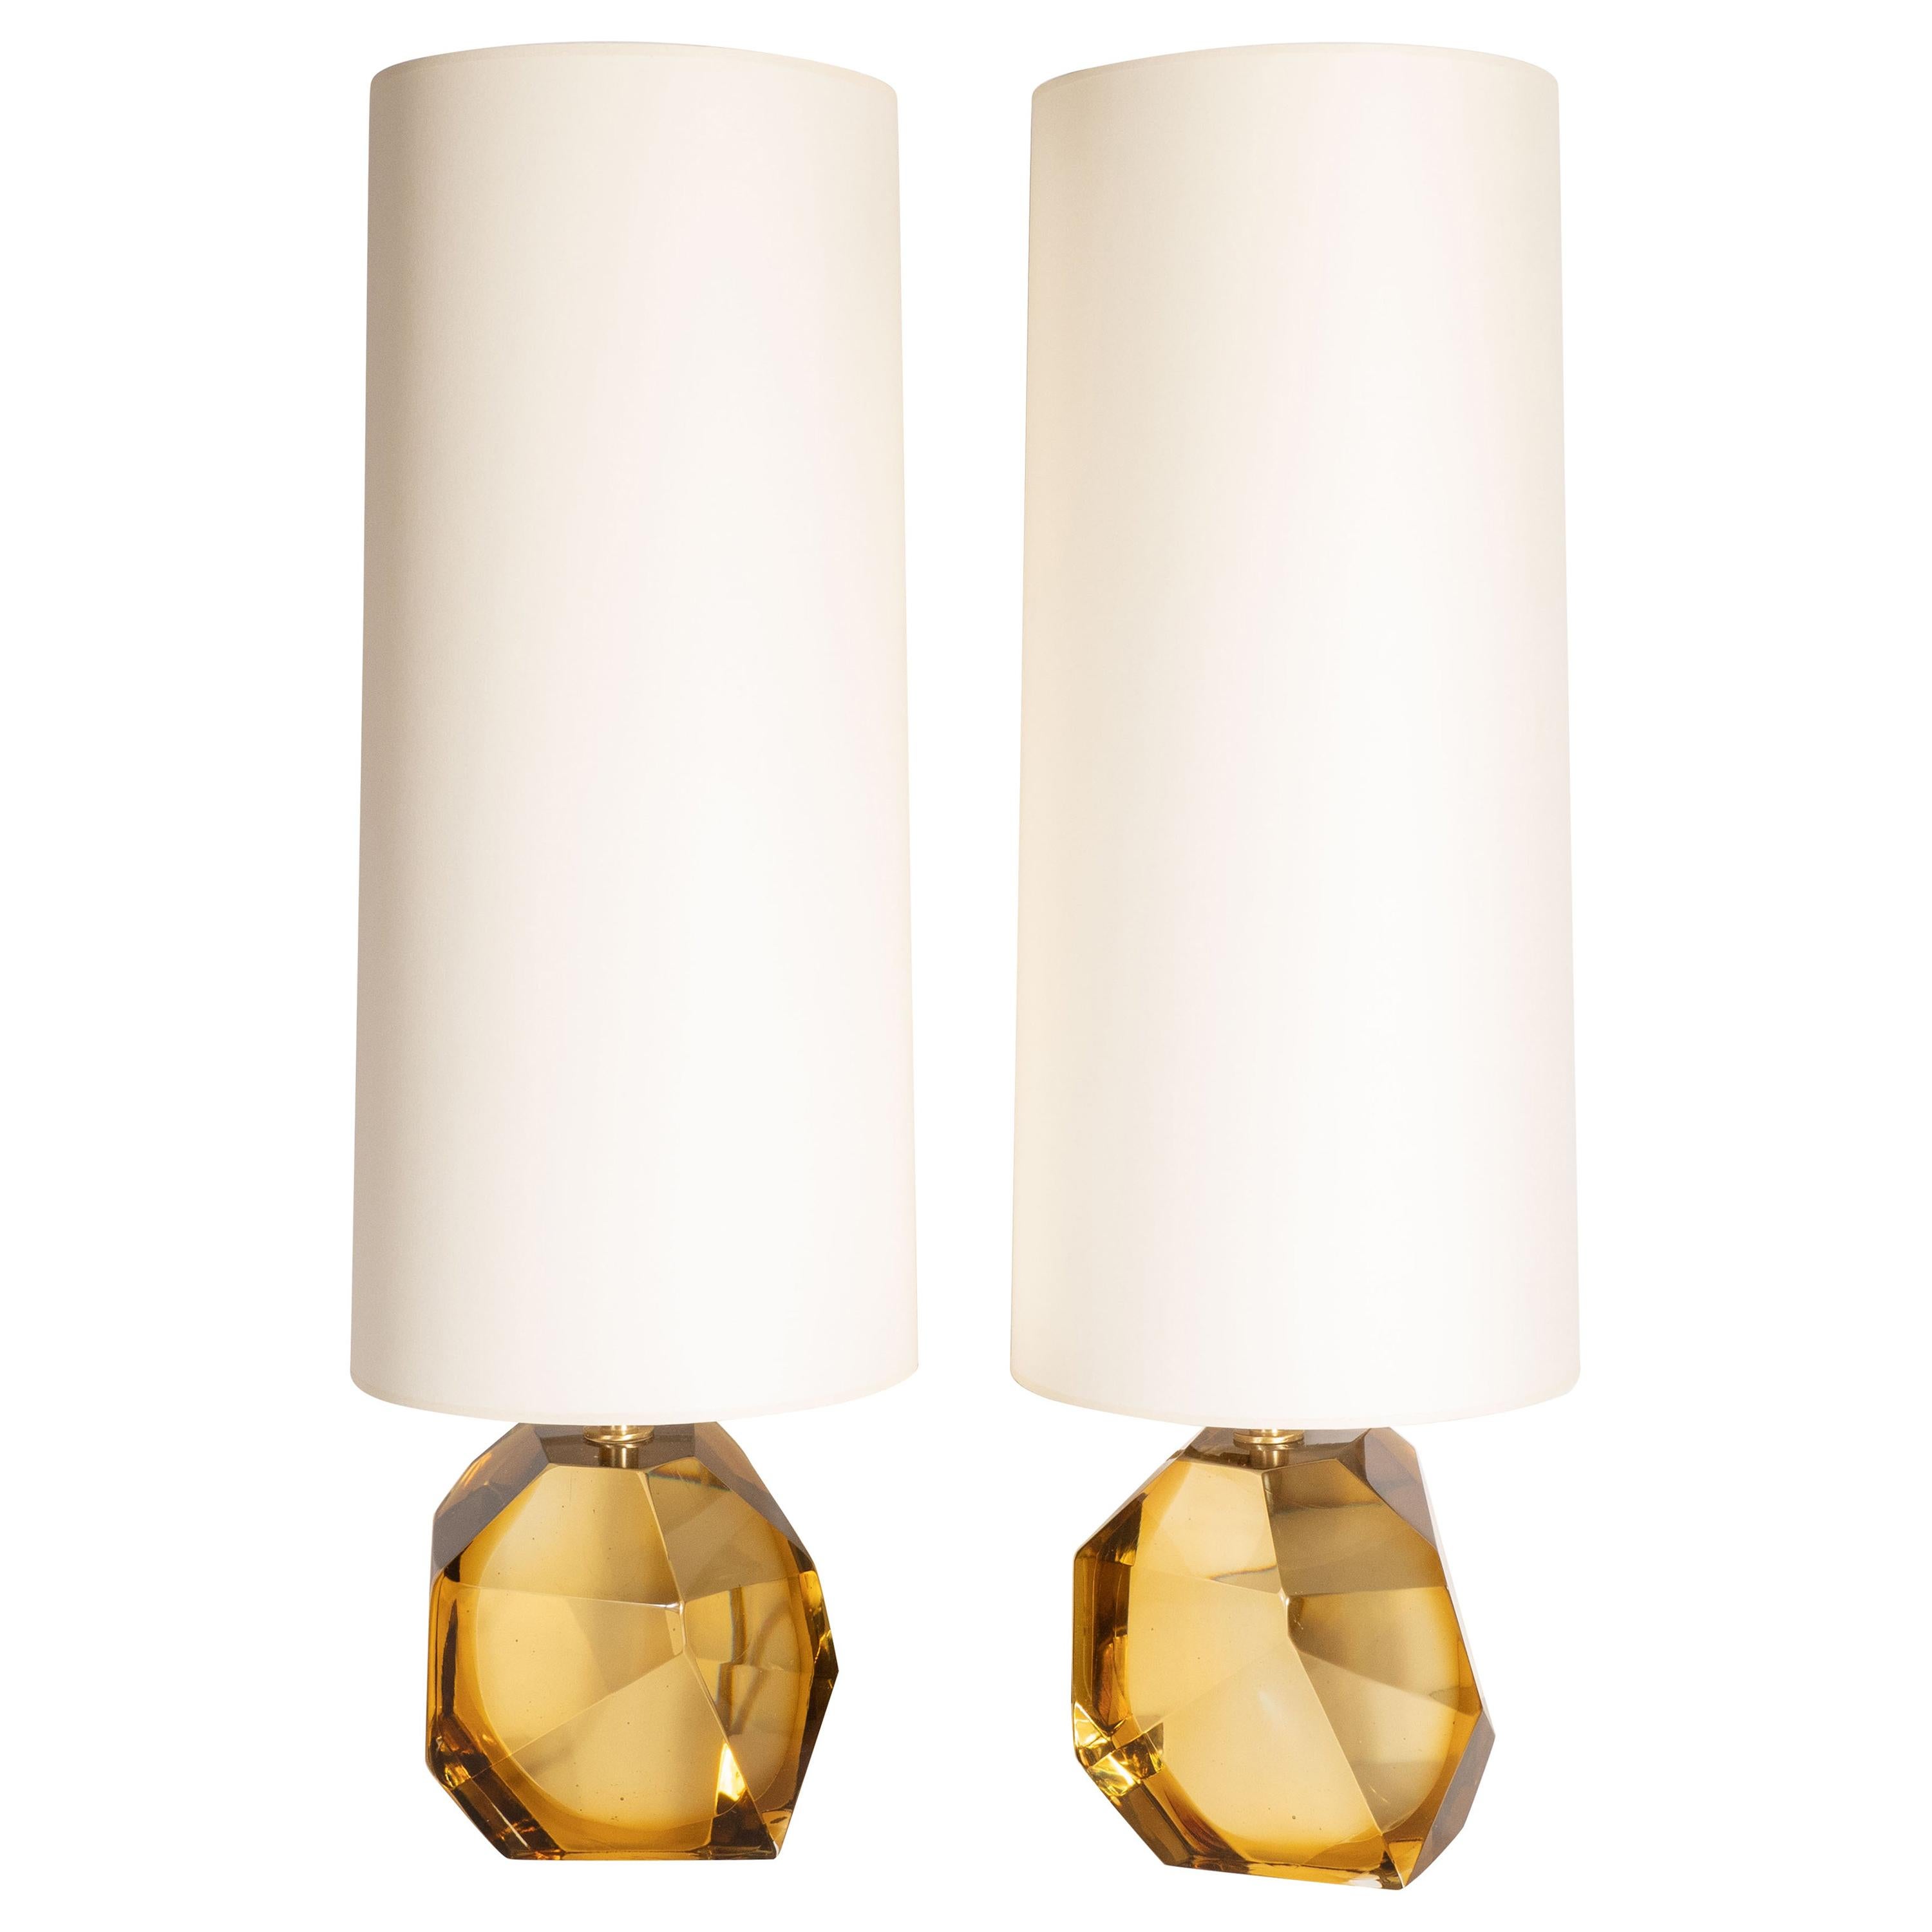 Modernist Faceted Handblown Murano Topaz Glass Table Lamps For Sale